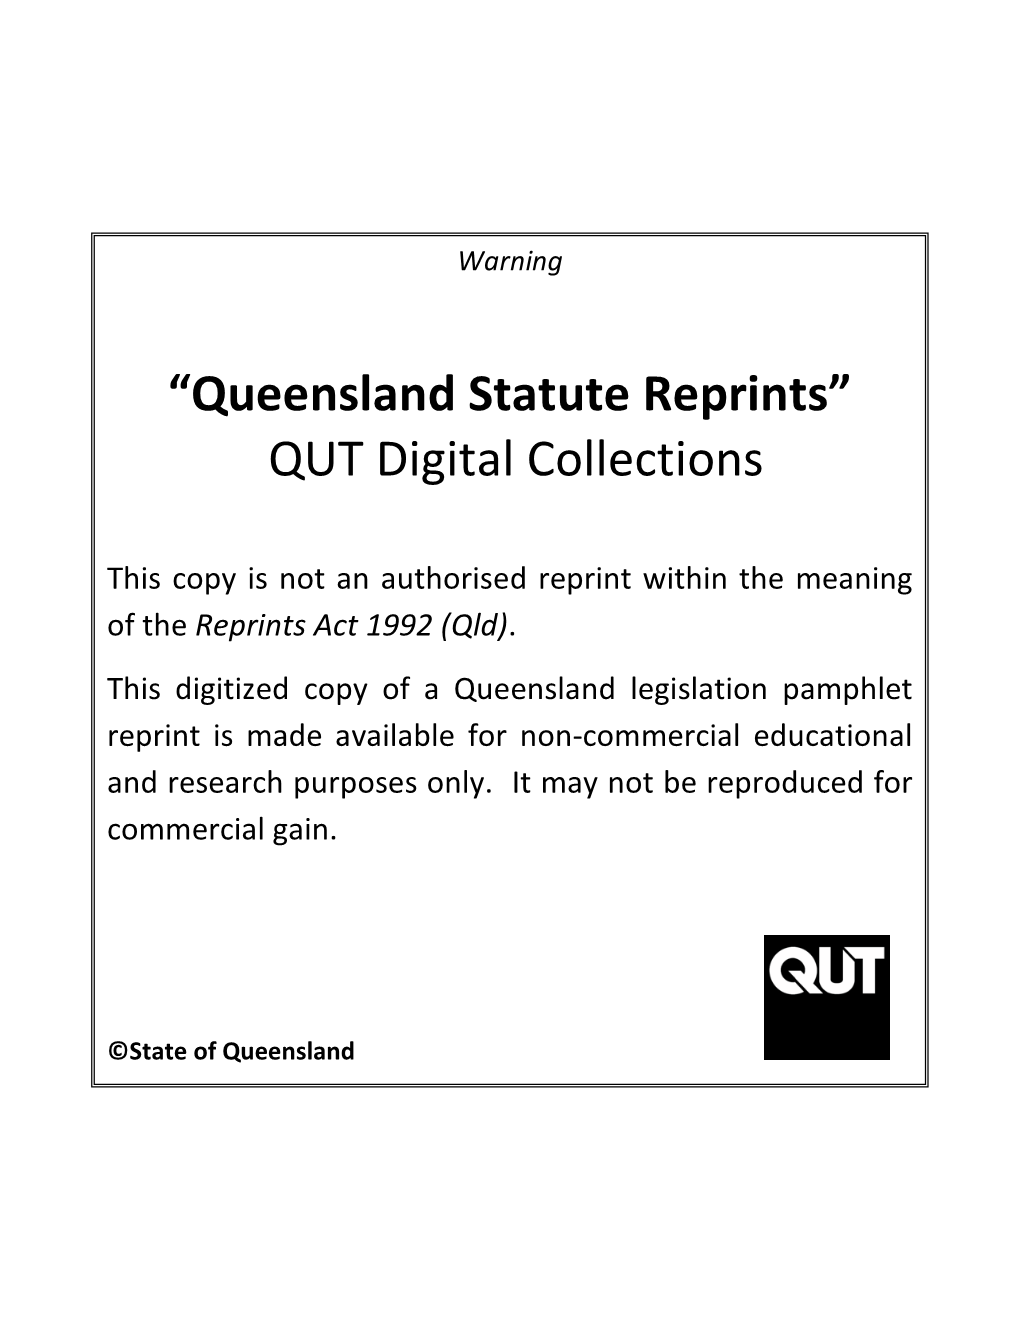 (Flood Mitigation Works Approval) Act of 1952 Queensland Reprint